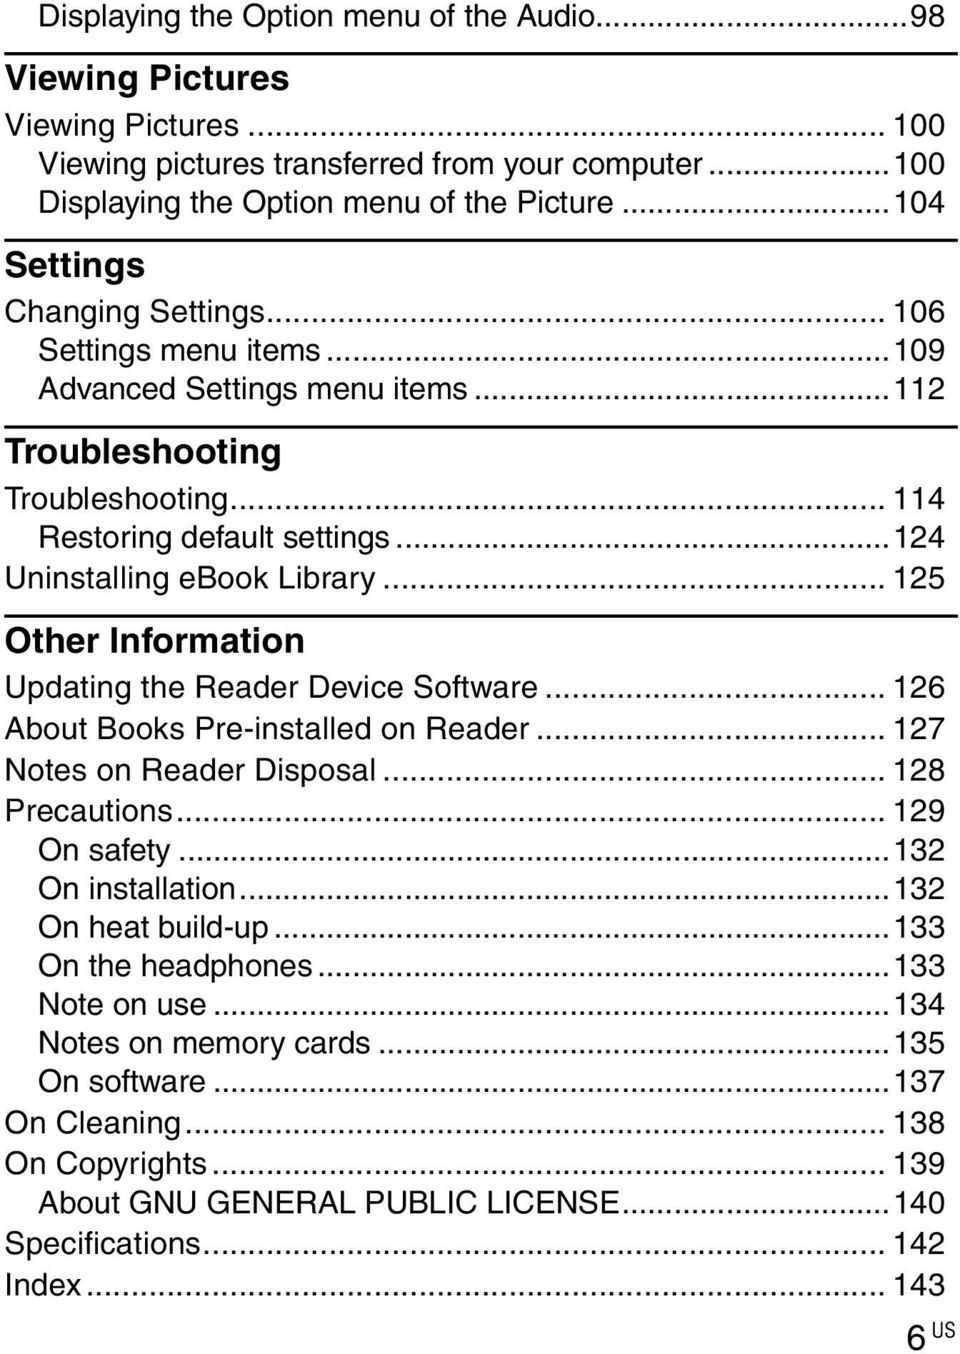 .. 125 Other Information Updating the Reader Device Software... 126 About Books Pre-installed on Reader... 127 Notes on Reader Disposal... 128 Precautions... 129 On safety...132 On installation.